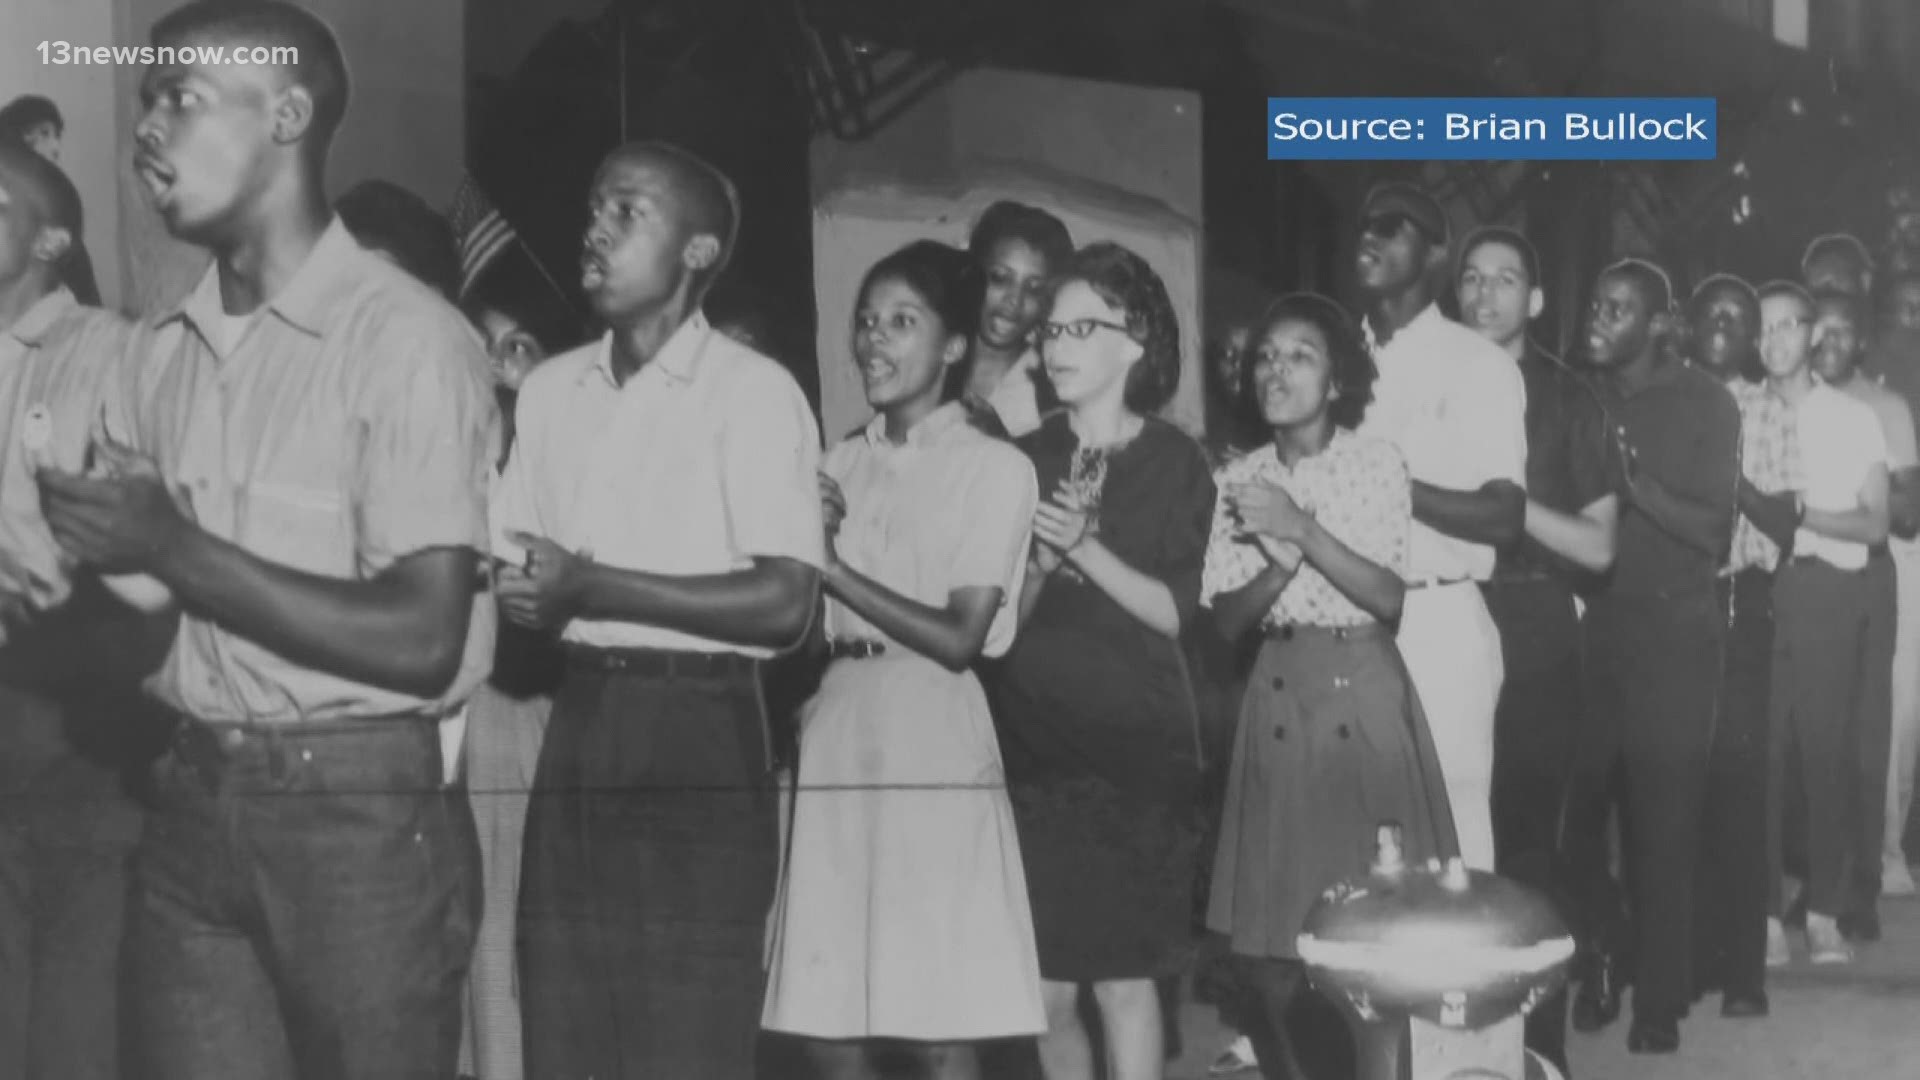 On February 22, 1960, 34 Virginia Union University students staged a sit-in at an all white department store in downtown Richmond.